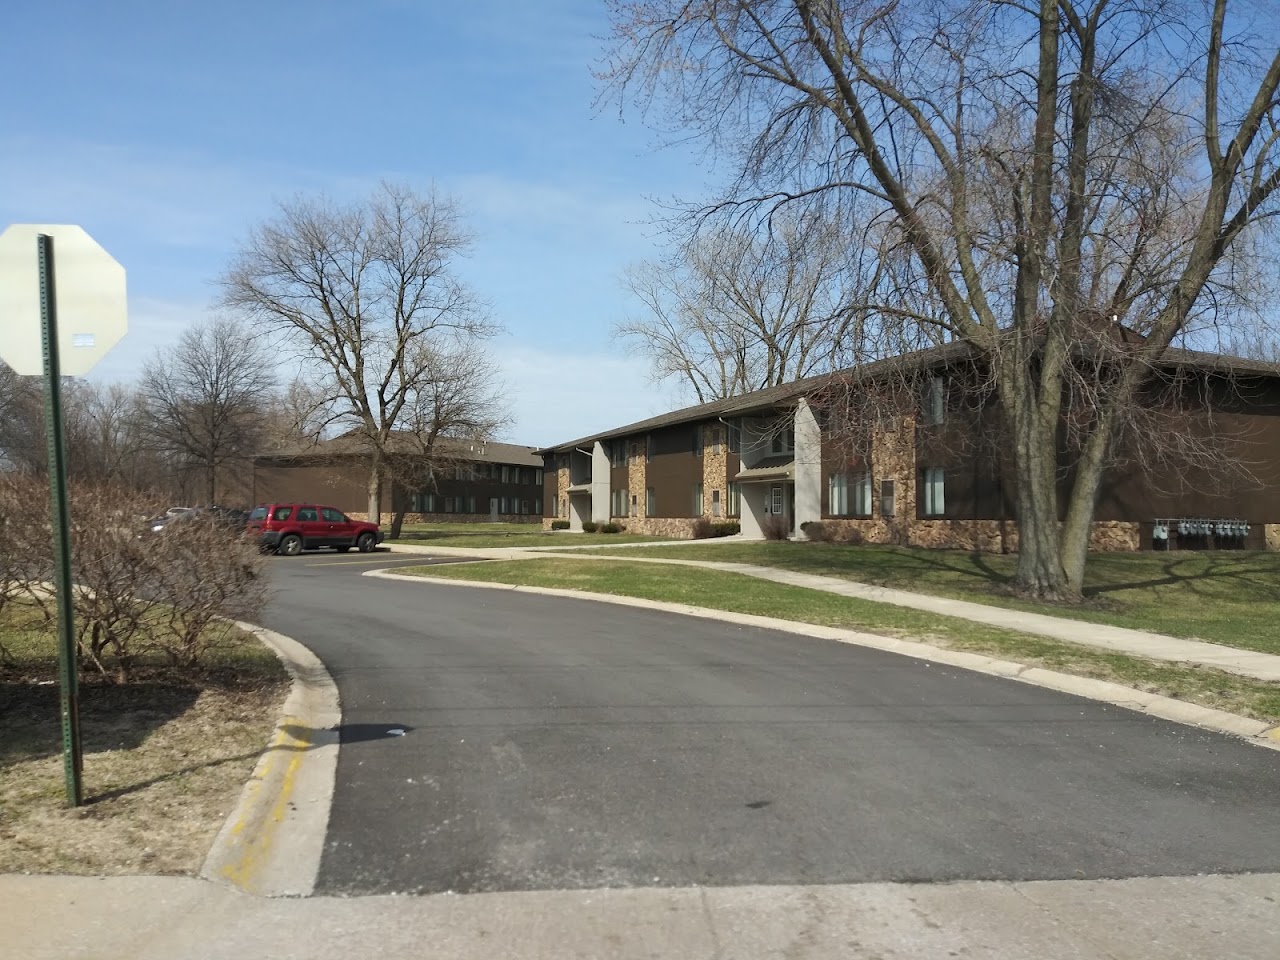 Photo of SMALL FARMS RENEWAL. Affordable housing located at 1990 W 24TH LN GARY, IN 46404